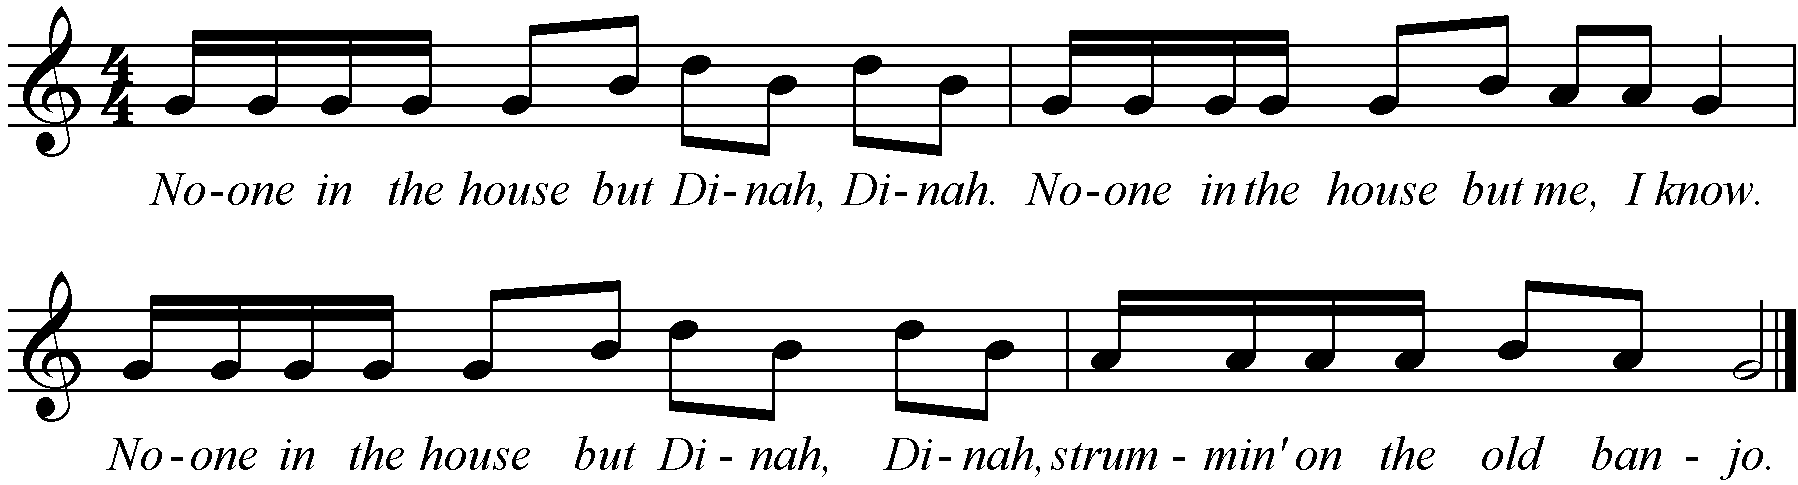 The traditional folk song, "Dinah" arranged for recorder.